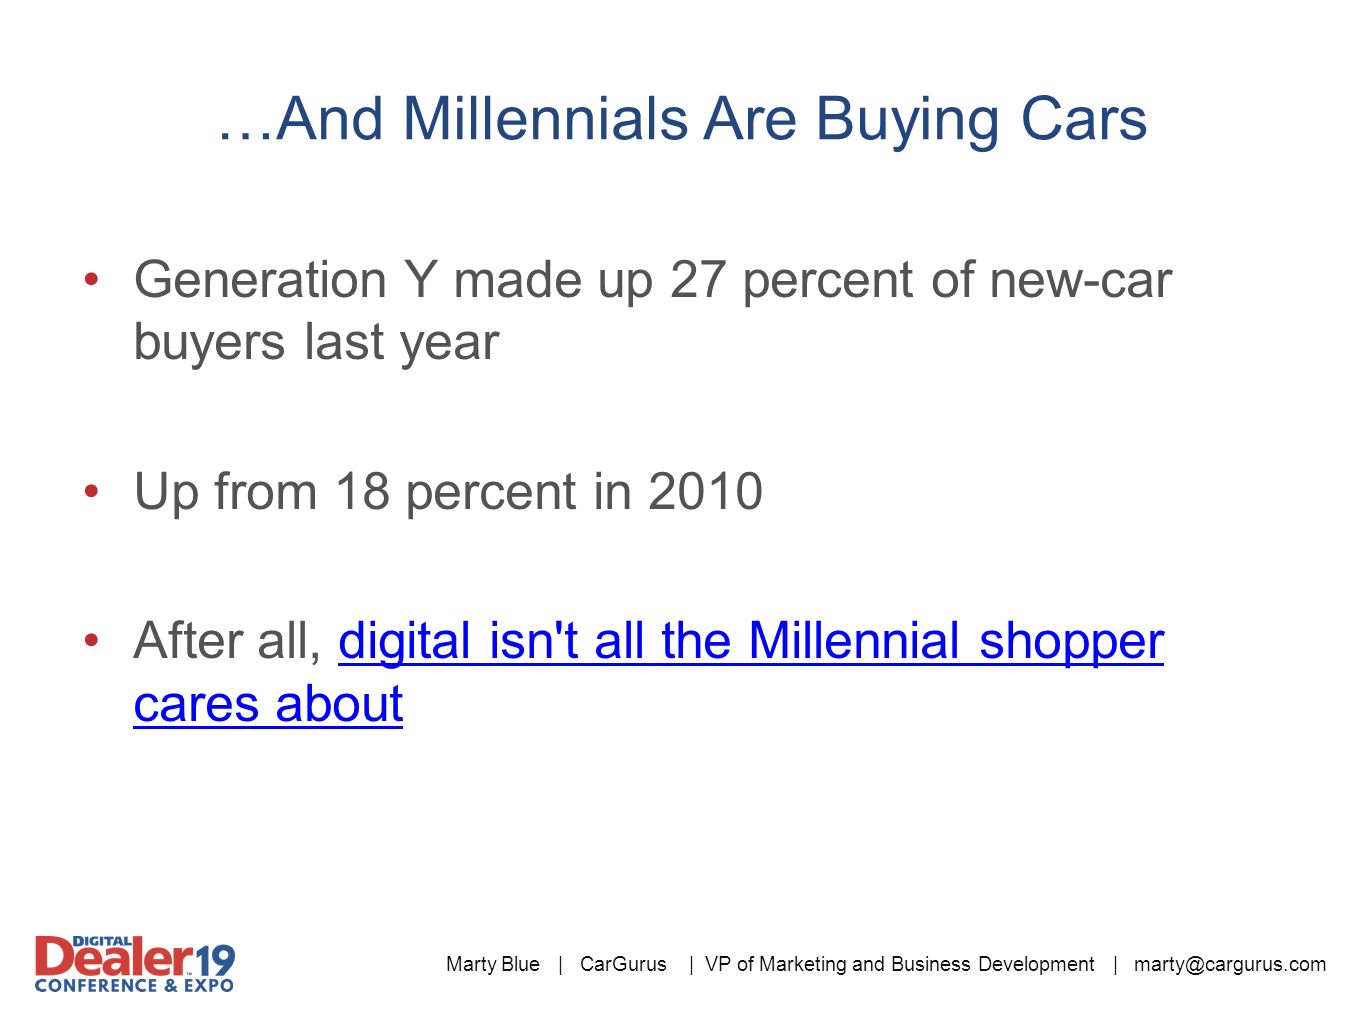 Marty Blue | CarGurus | VP of Marketing and Business Development | …And Millennials Are Buying Cars Generation Y made up 27 percent of new-car buyers last year Up from 18 percent in 2010 After all, digital isn t all the Millennial shopper cares aboutdigital isn t all the Millennial shopper cares about